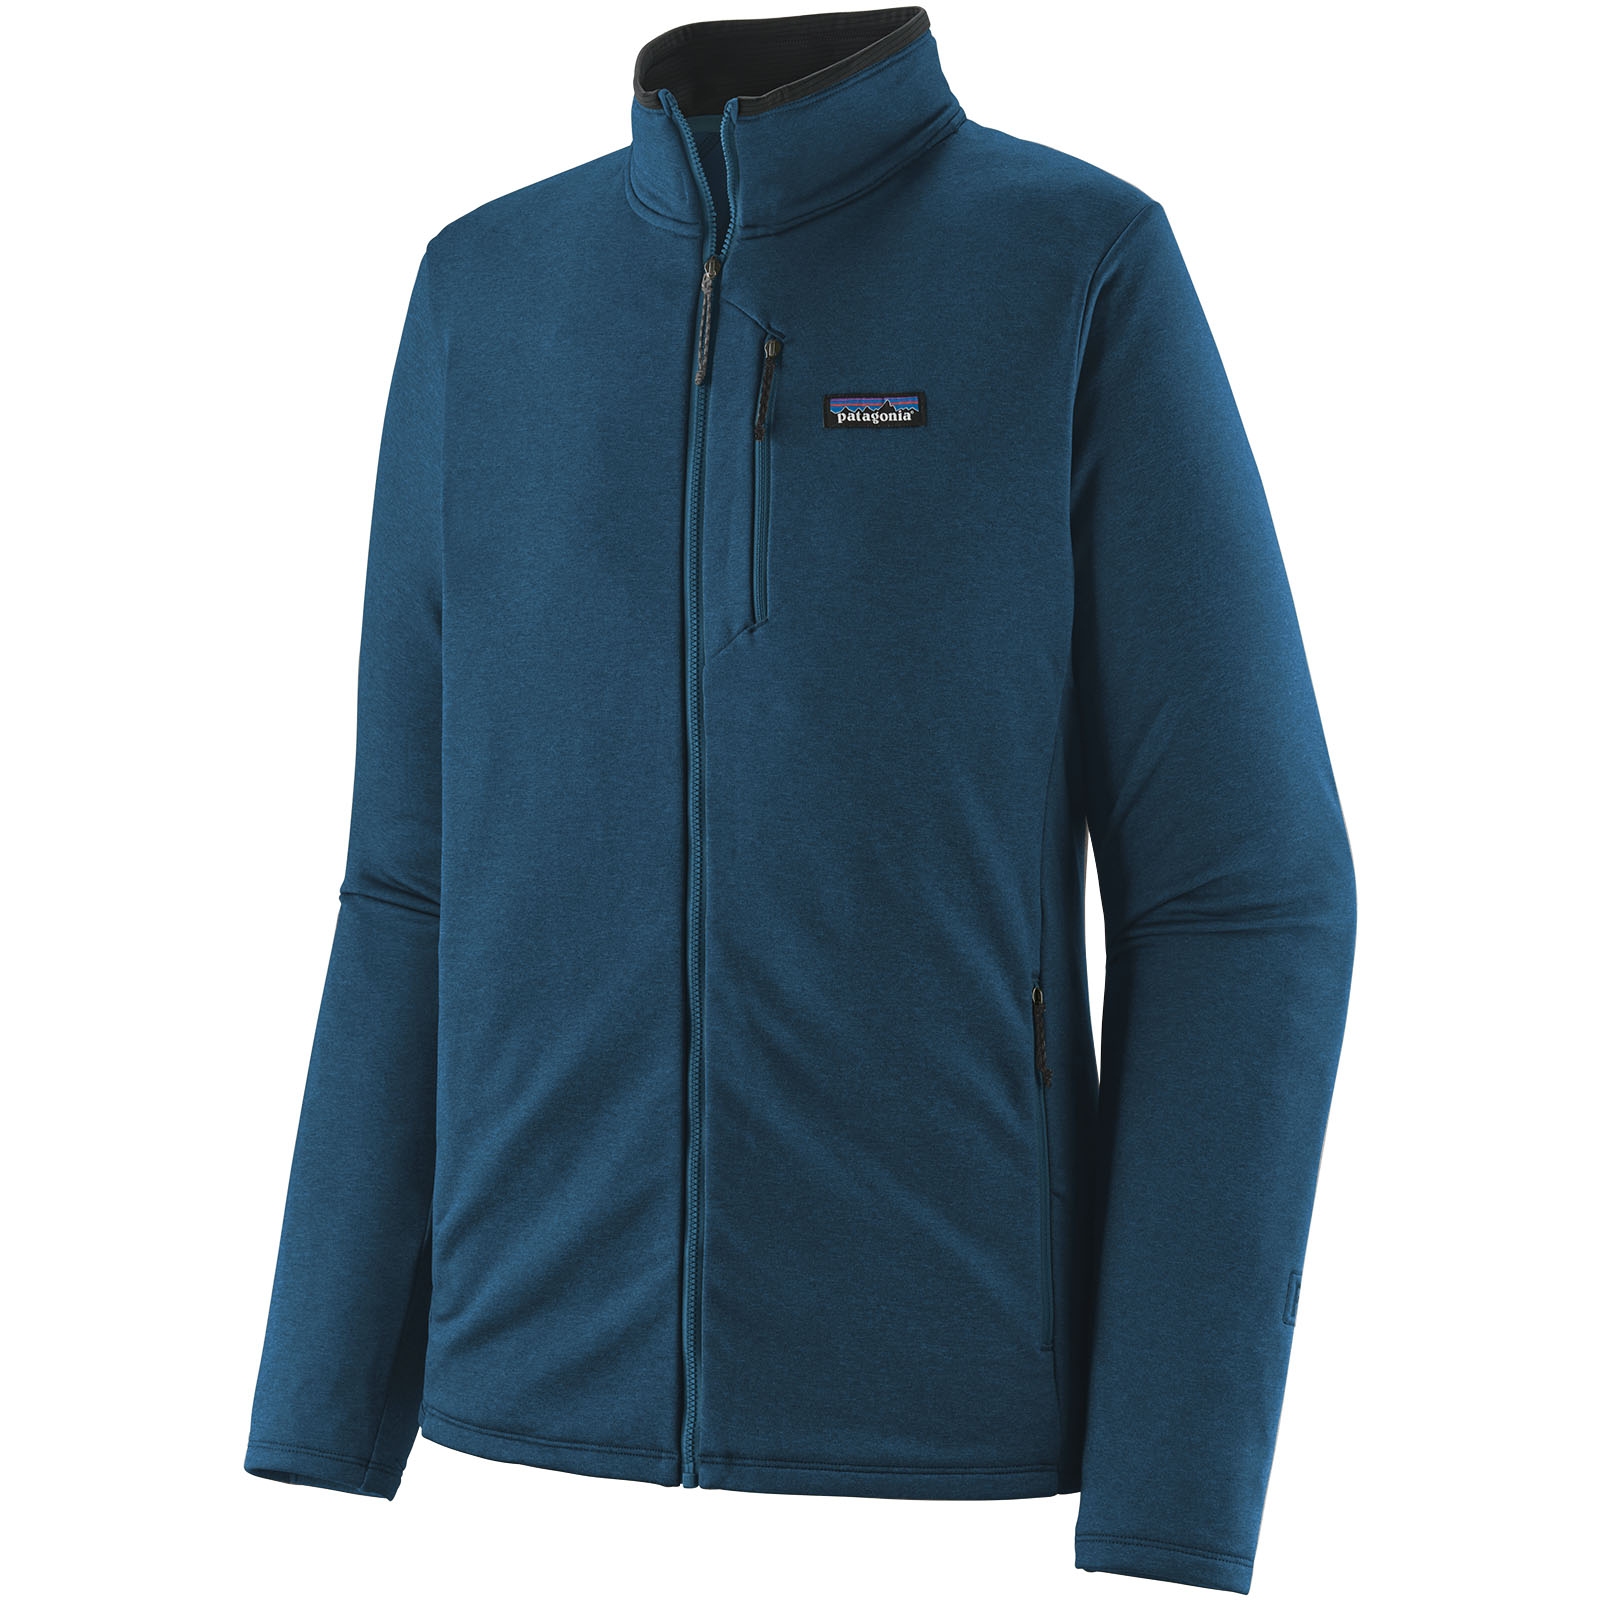 Picture of Patagonia R1 Daily Jacket - Lagom Blue - Tidepool Blue X-Dye